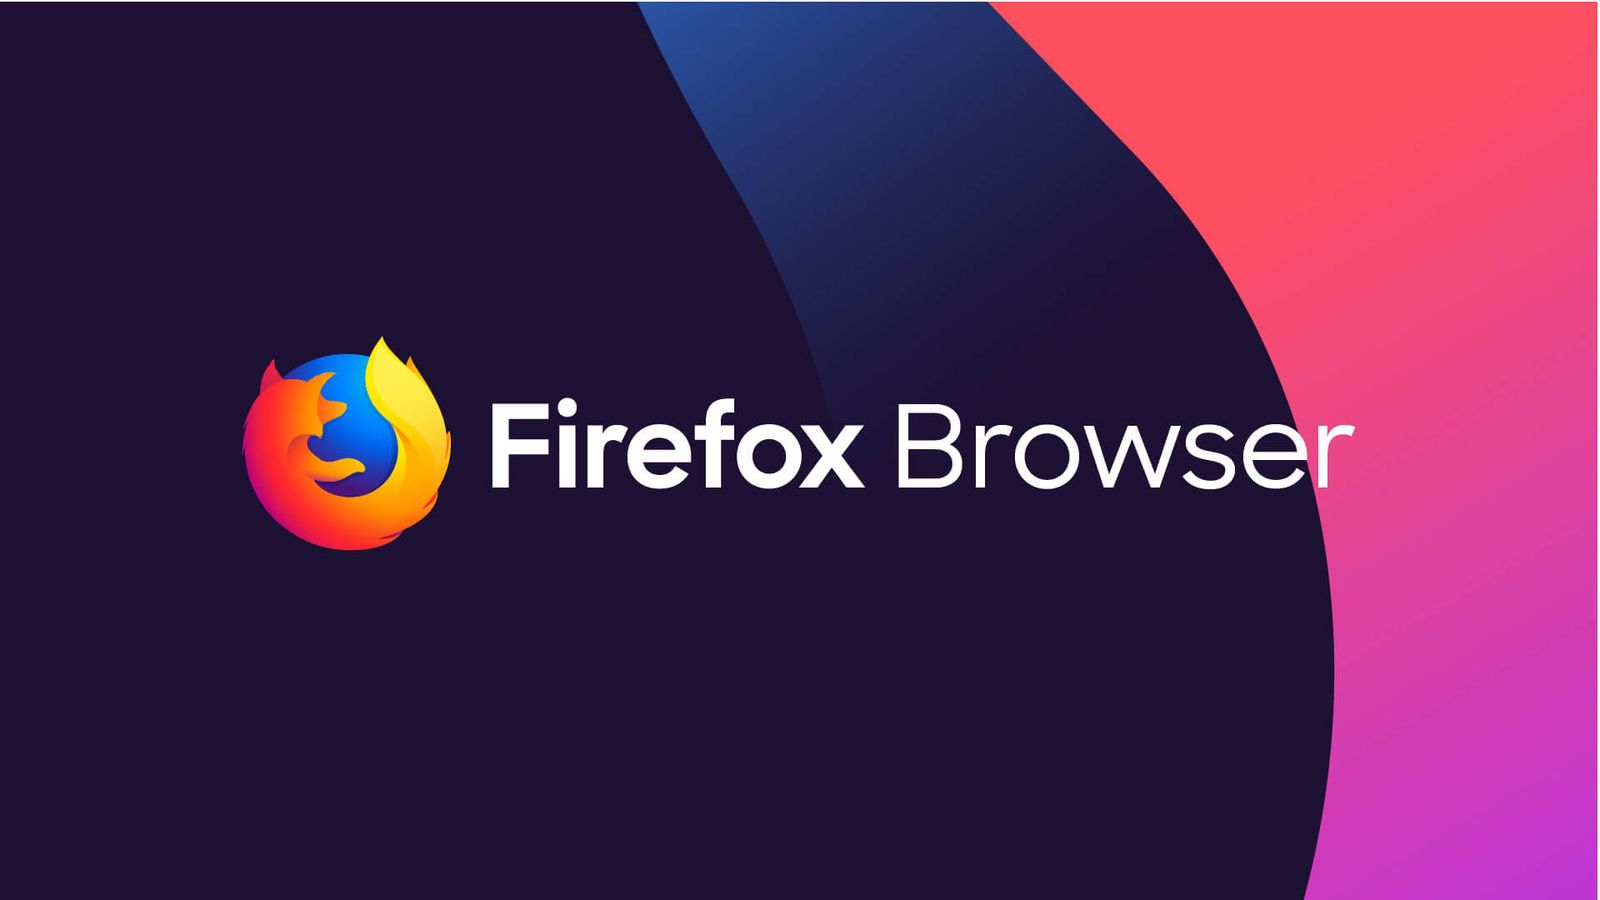 How to import your Google Chrome bookmarks to Firefox?